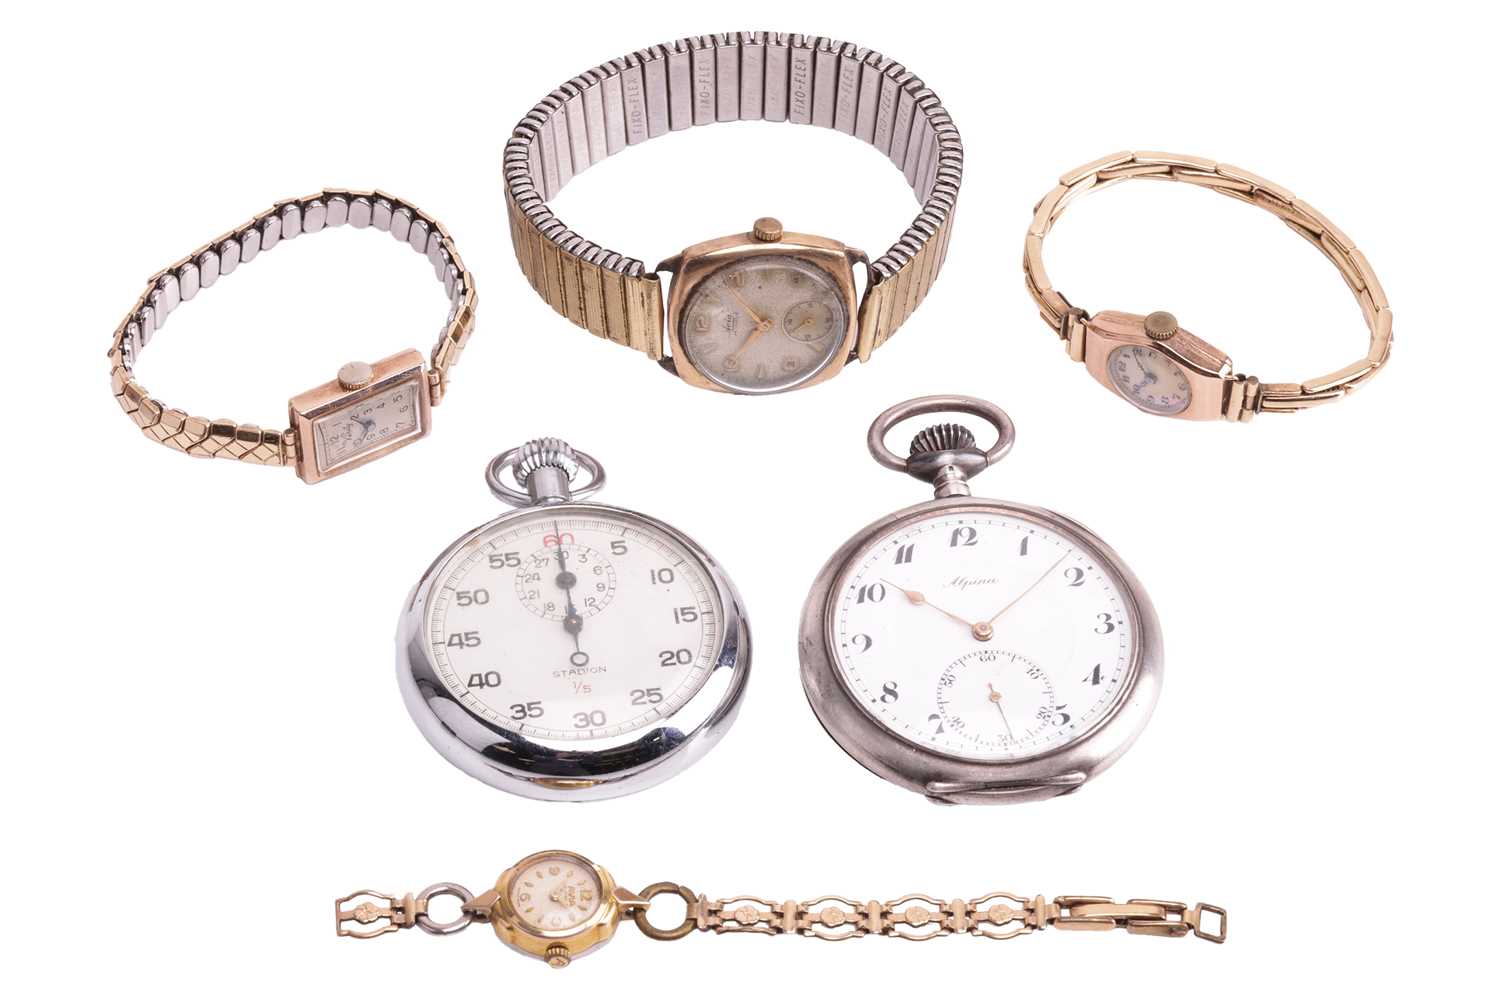 A small collection of watches including three wristwatches with 9ct gold cases and rolled gold strap